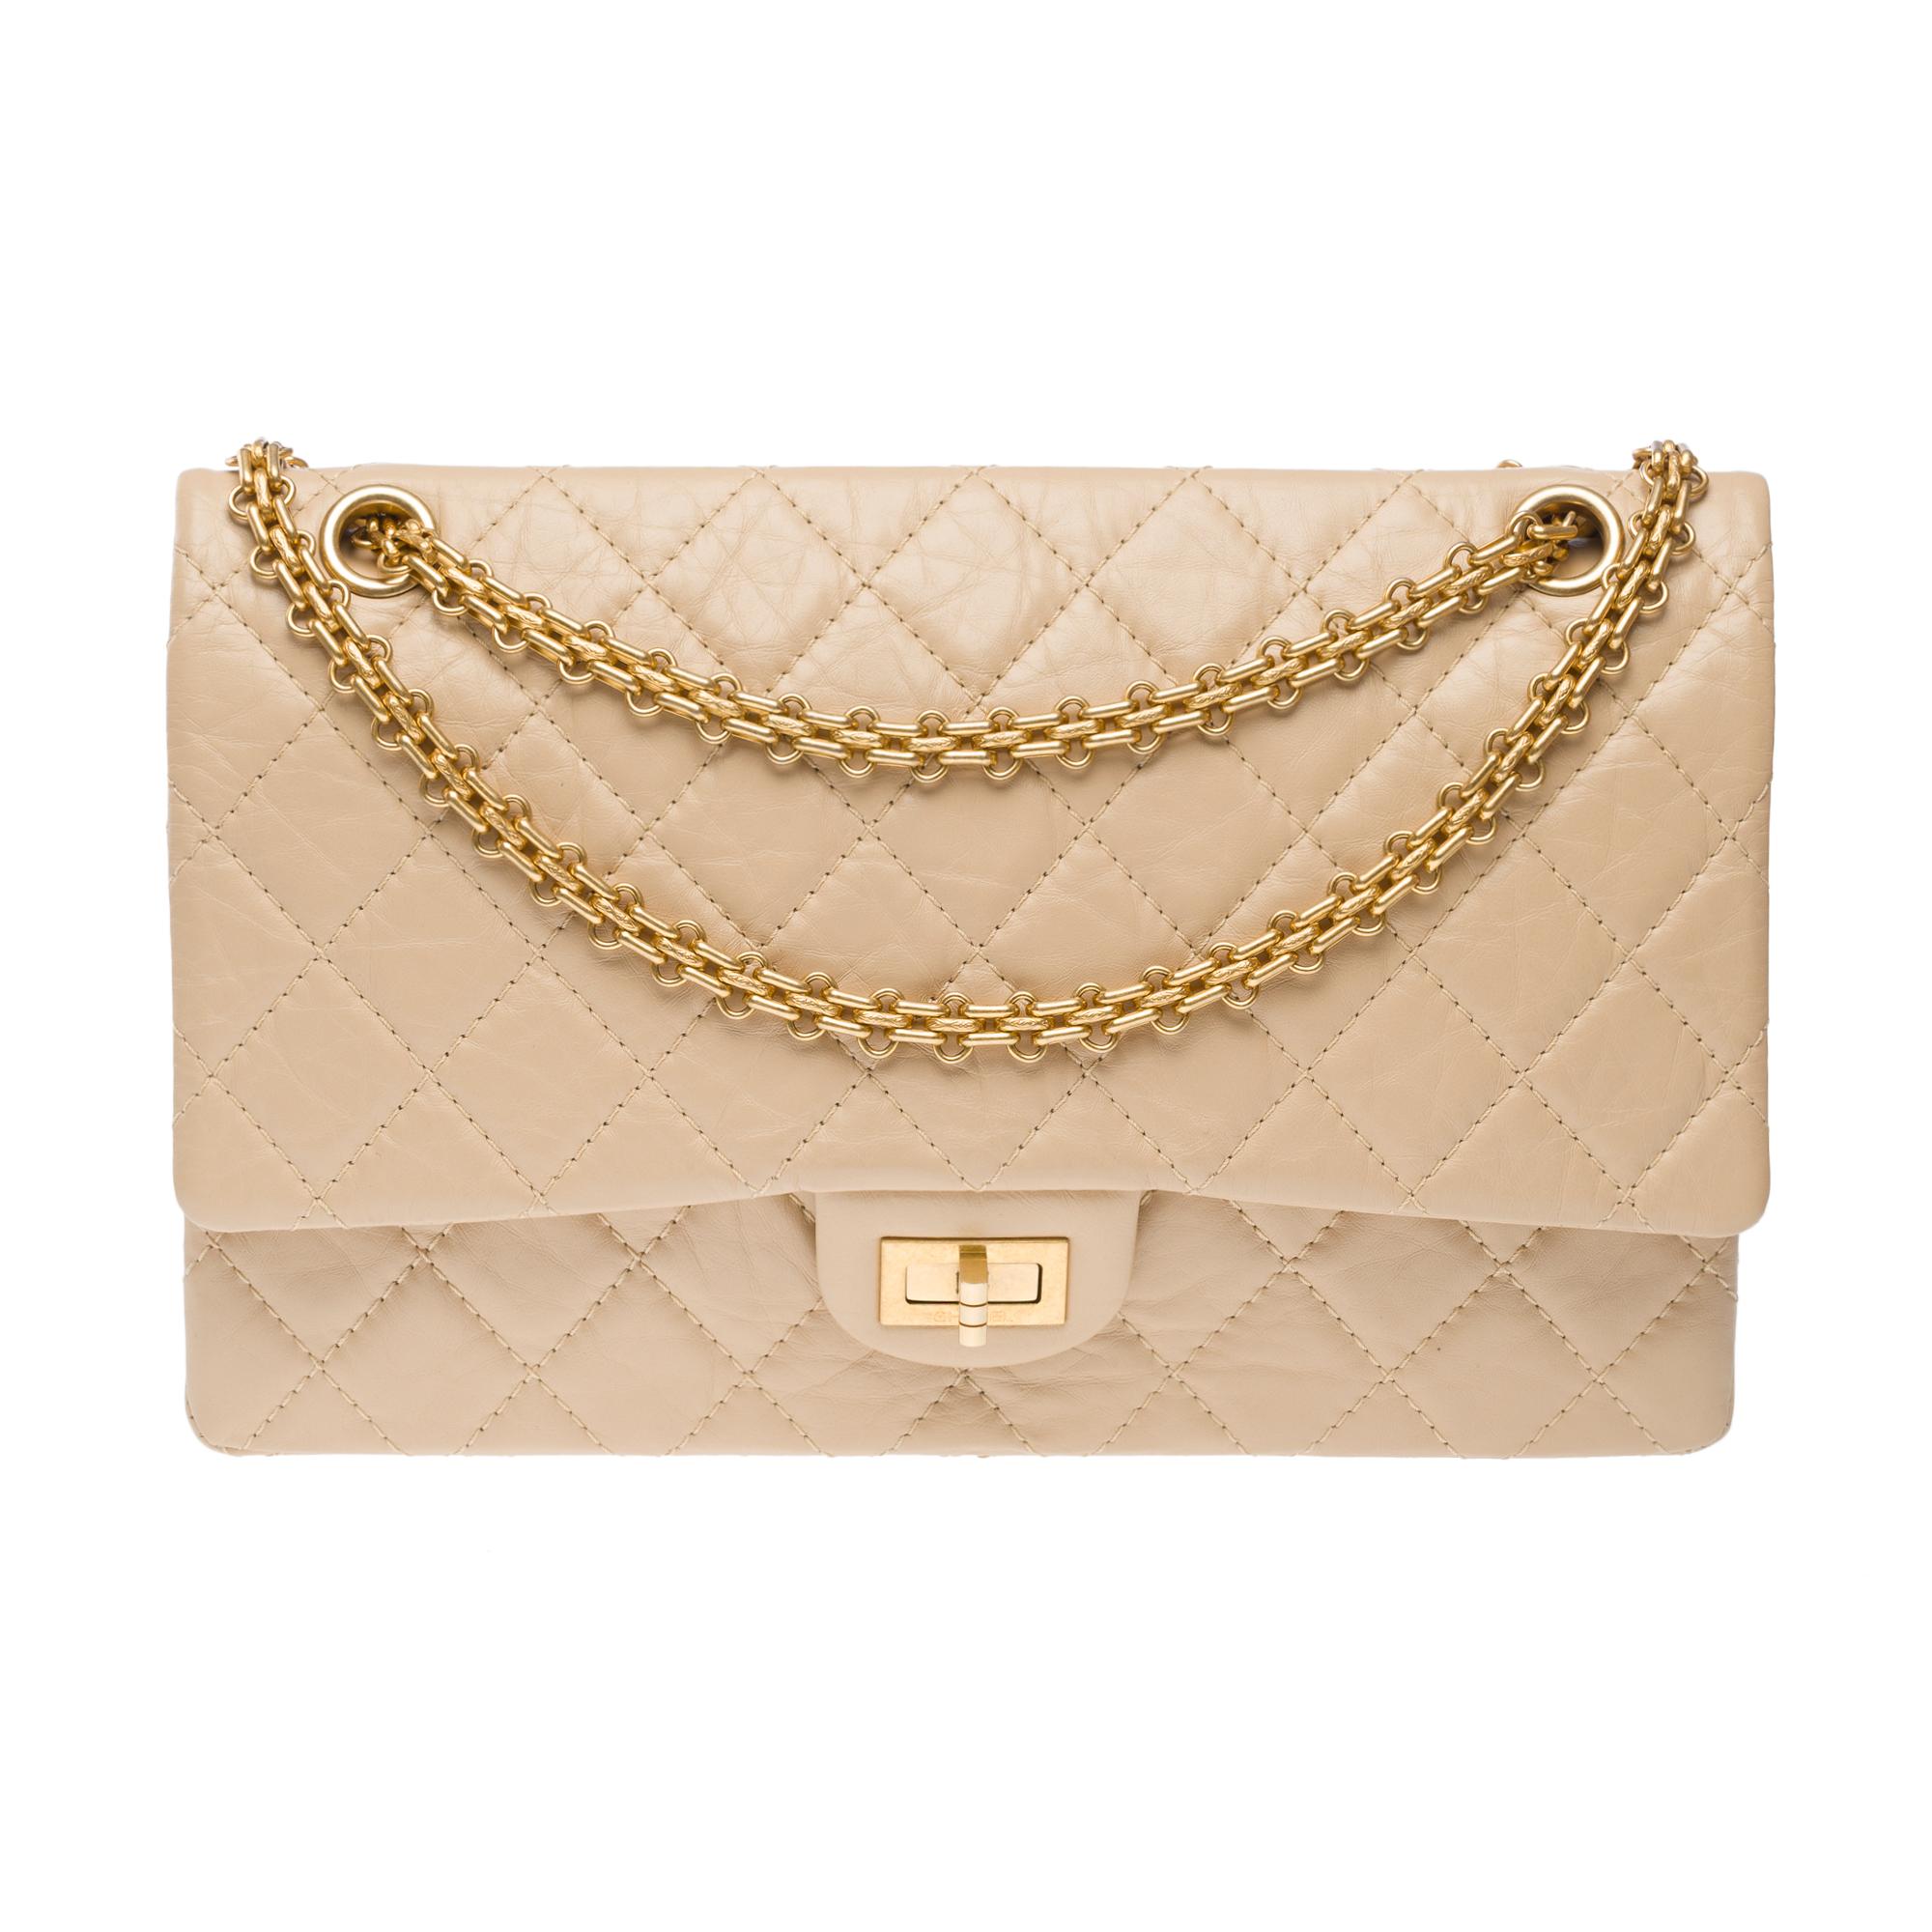 Women's Iconic Chanel 2.55 double flap shoulder bag in quilted beige leather, GHW For Sale